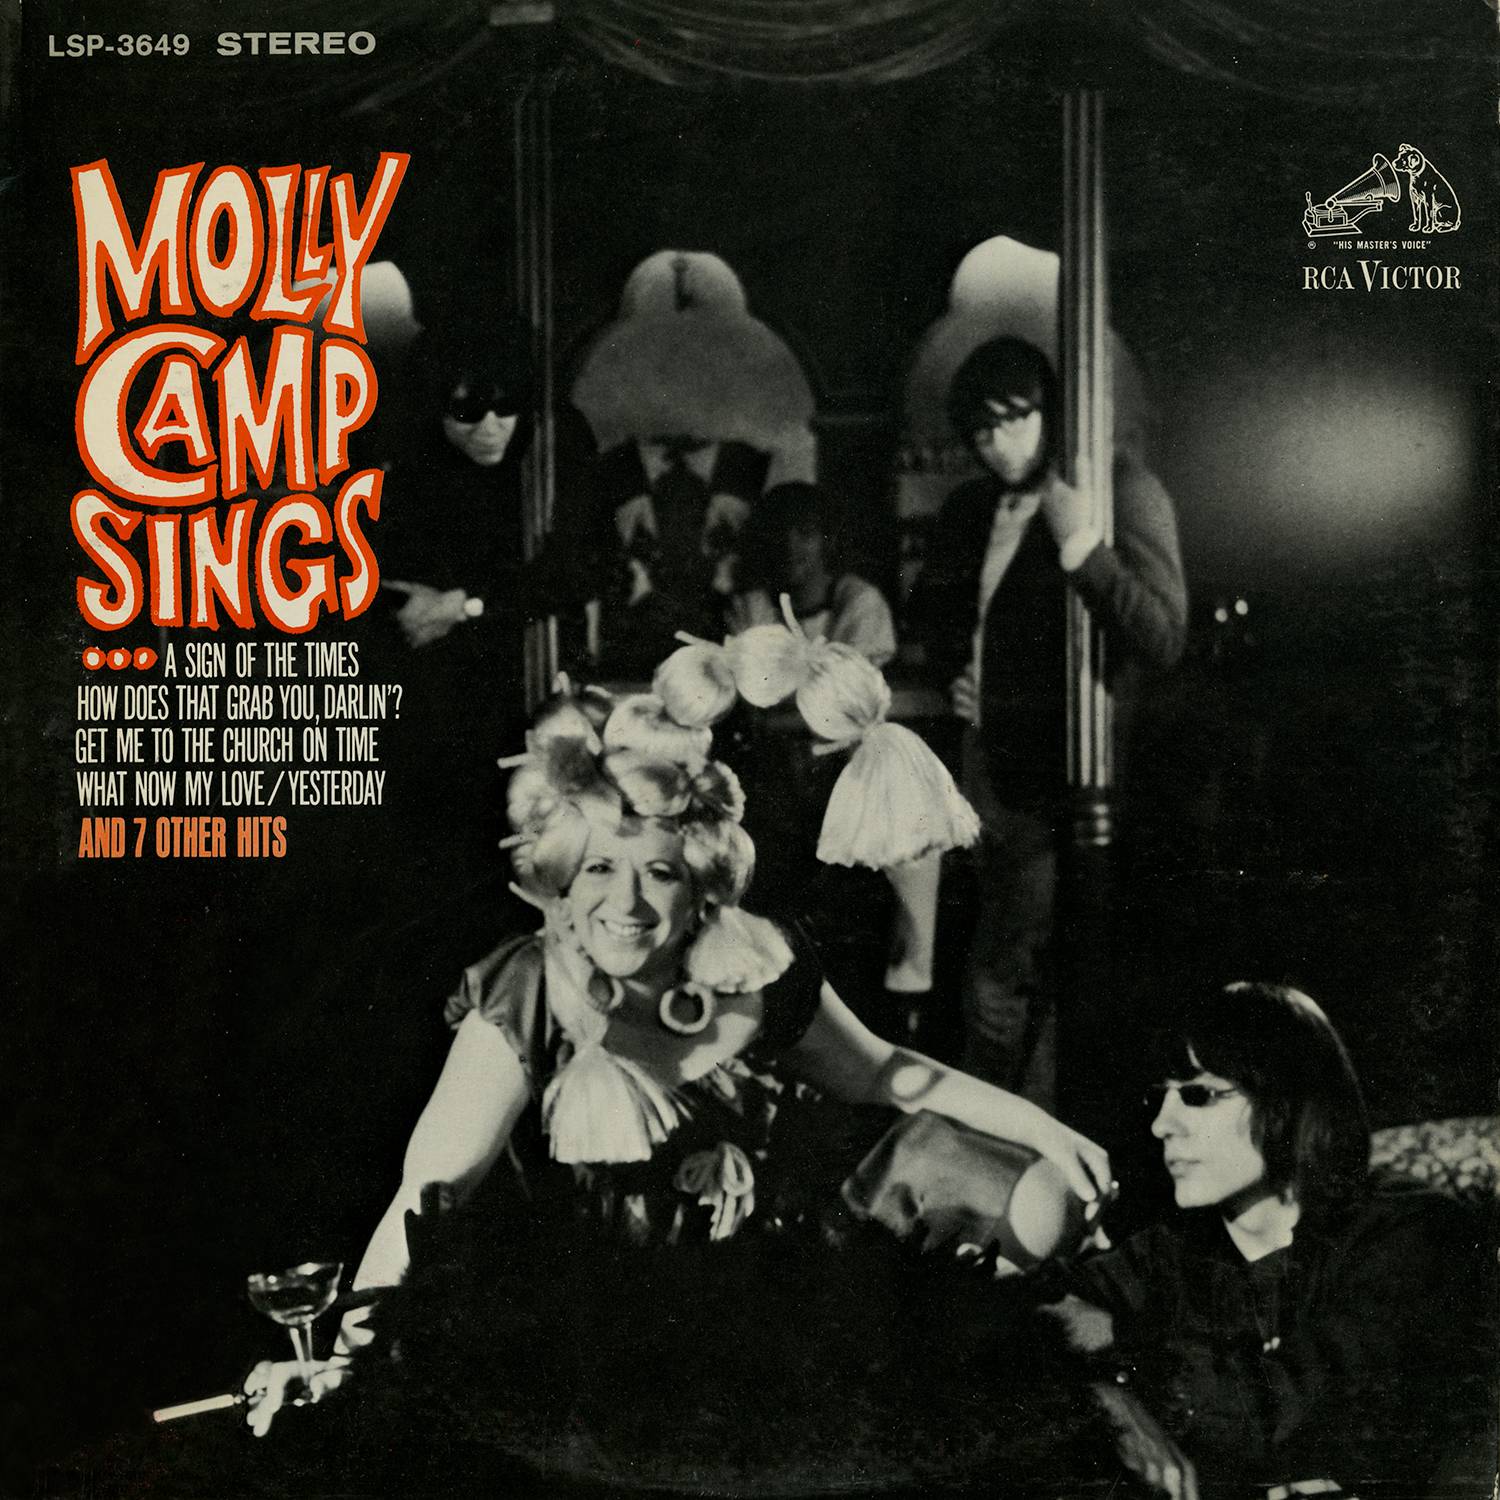 Molly Camp – Molly Camp Sings (1966/2016) [AcousticSound FLAC 24bit/192kHz]